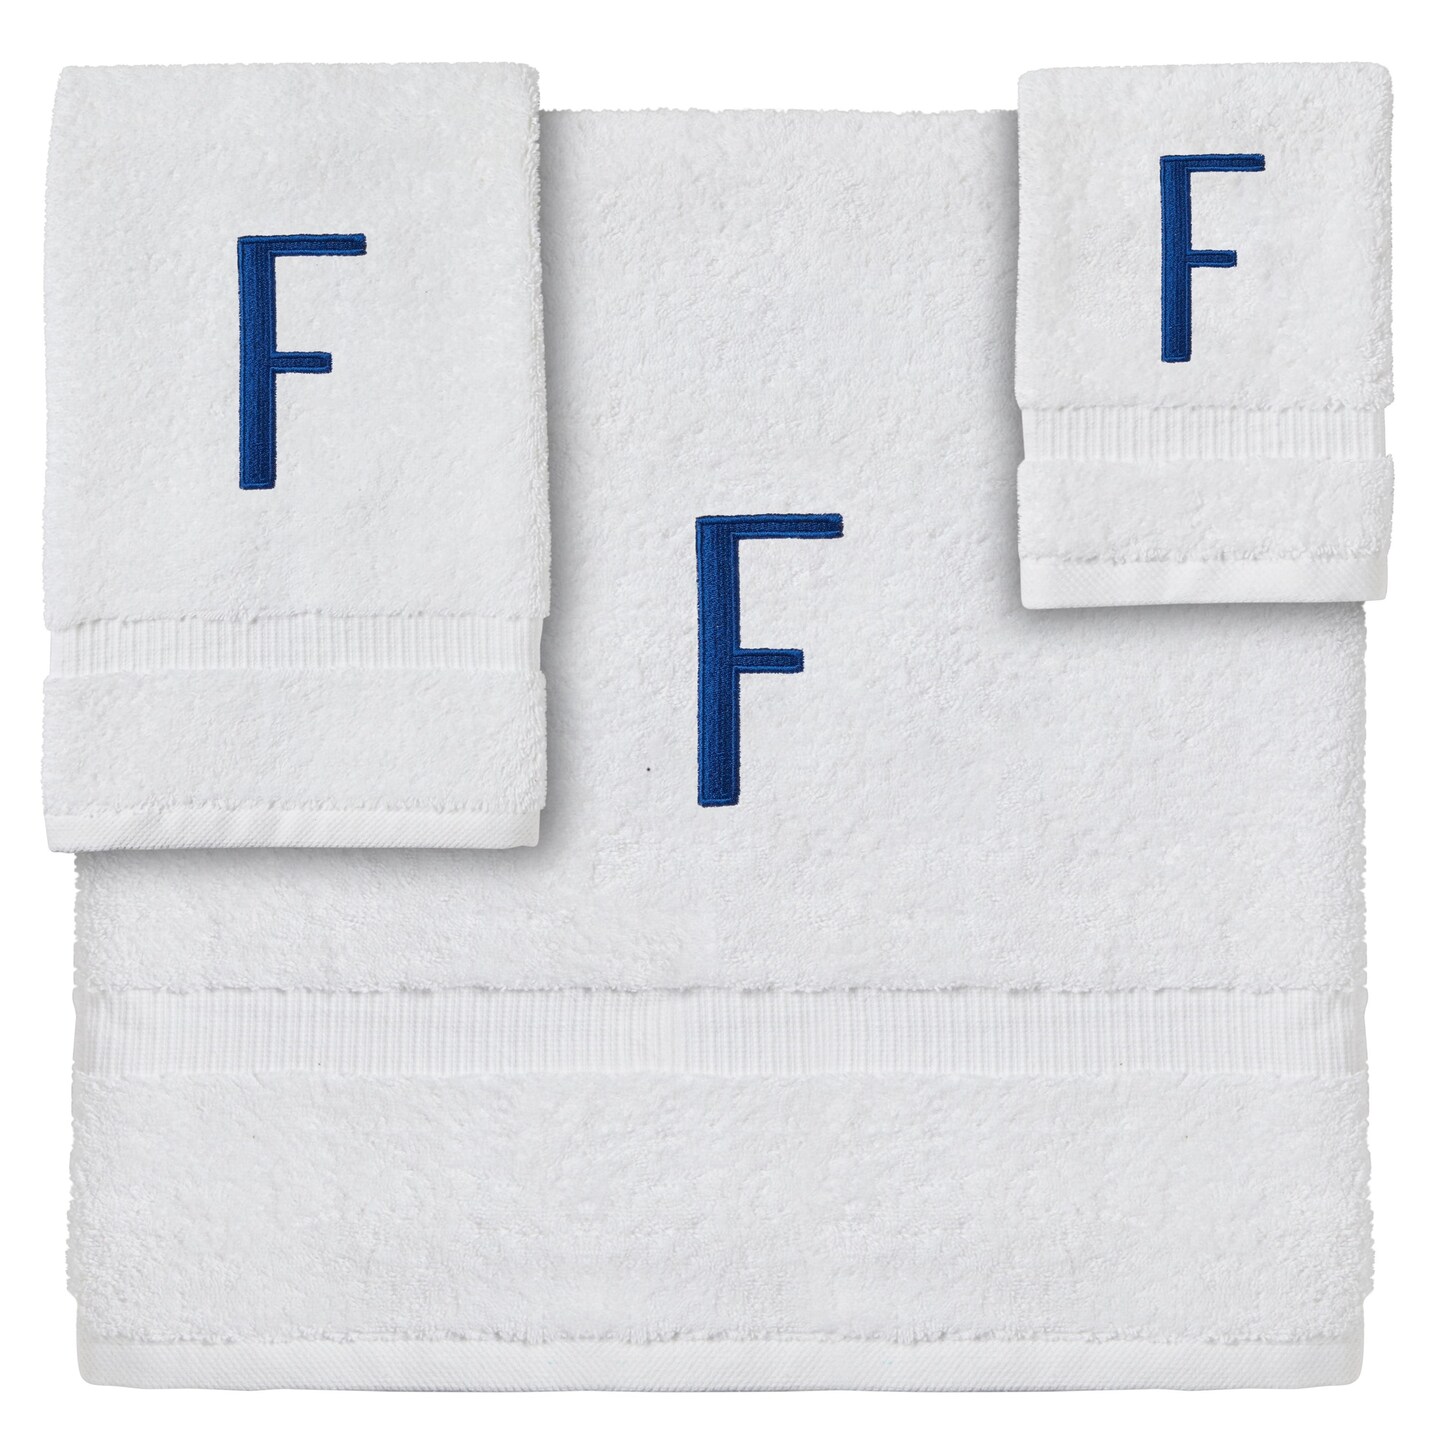 3 Piece Letter F Monogrammed Bath Towels Set, White Cotton Bath Towel, Hand Towel, and Washcloth with Blue Embroidered Initial F for Wedding Gift, Bridal Shower